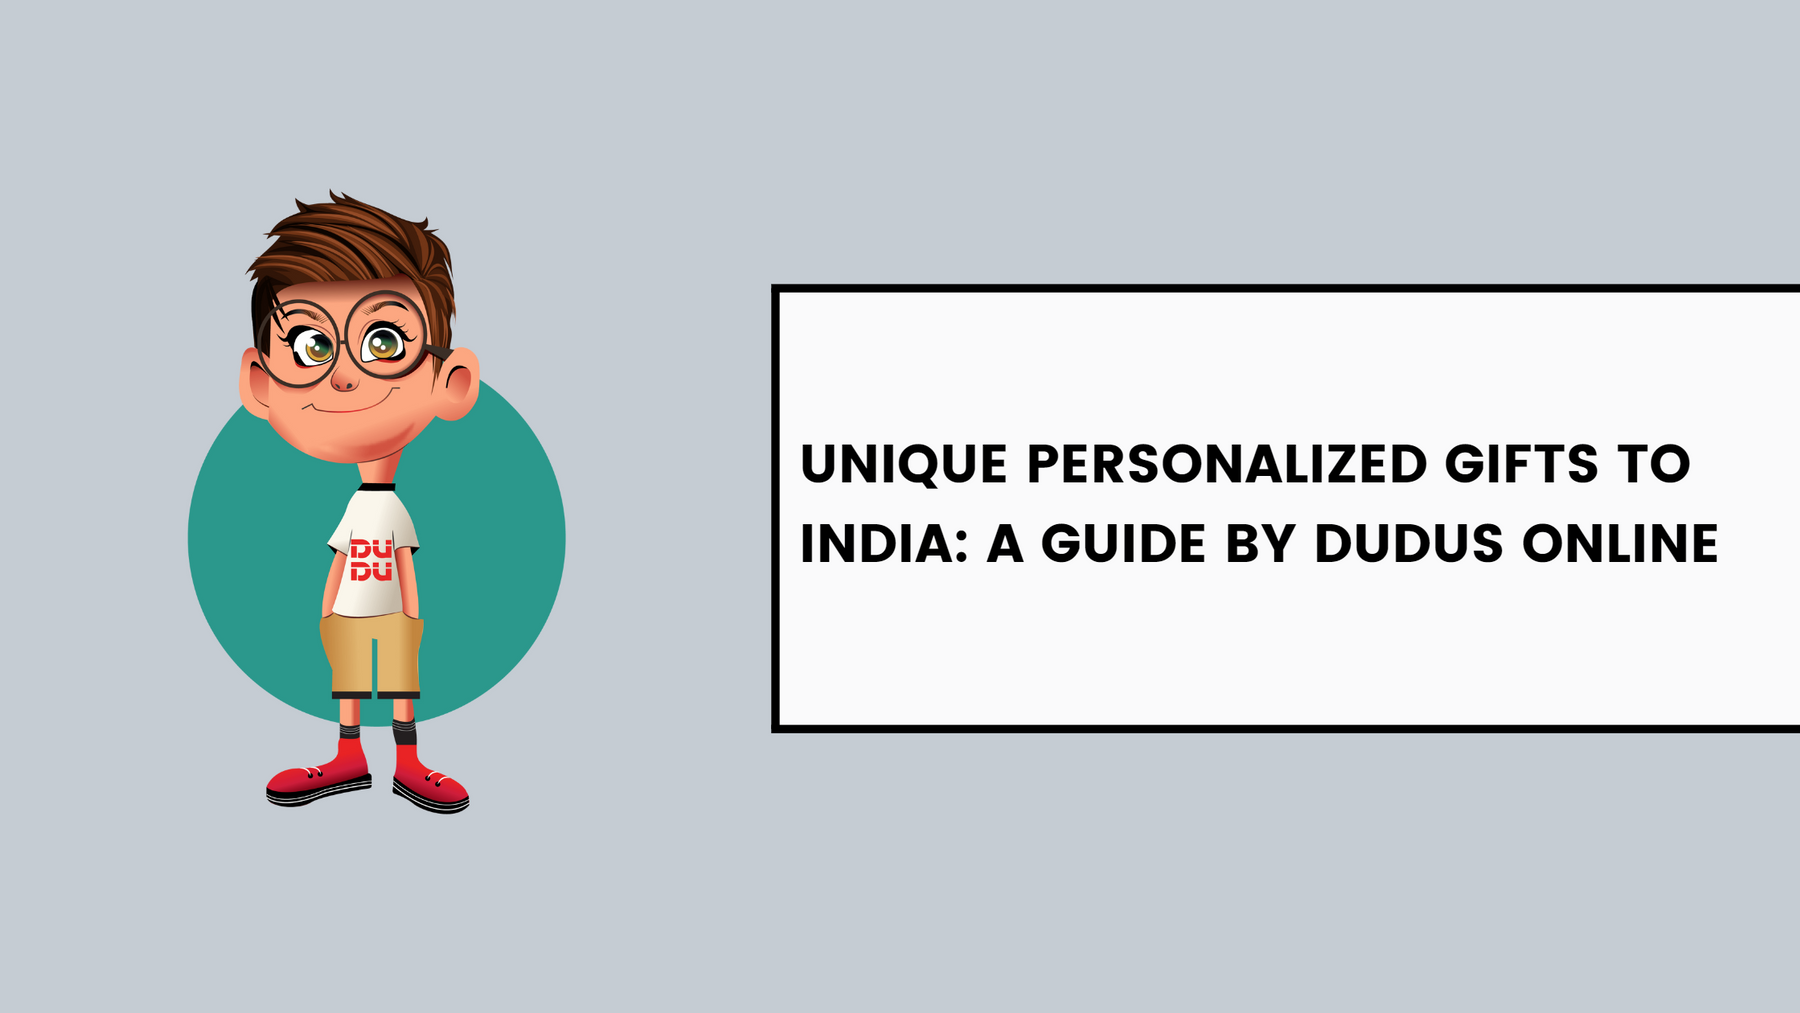 Unique Personalized Gifts to India: A Guide by Dudus Online